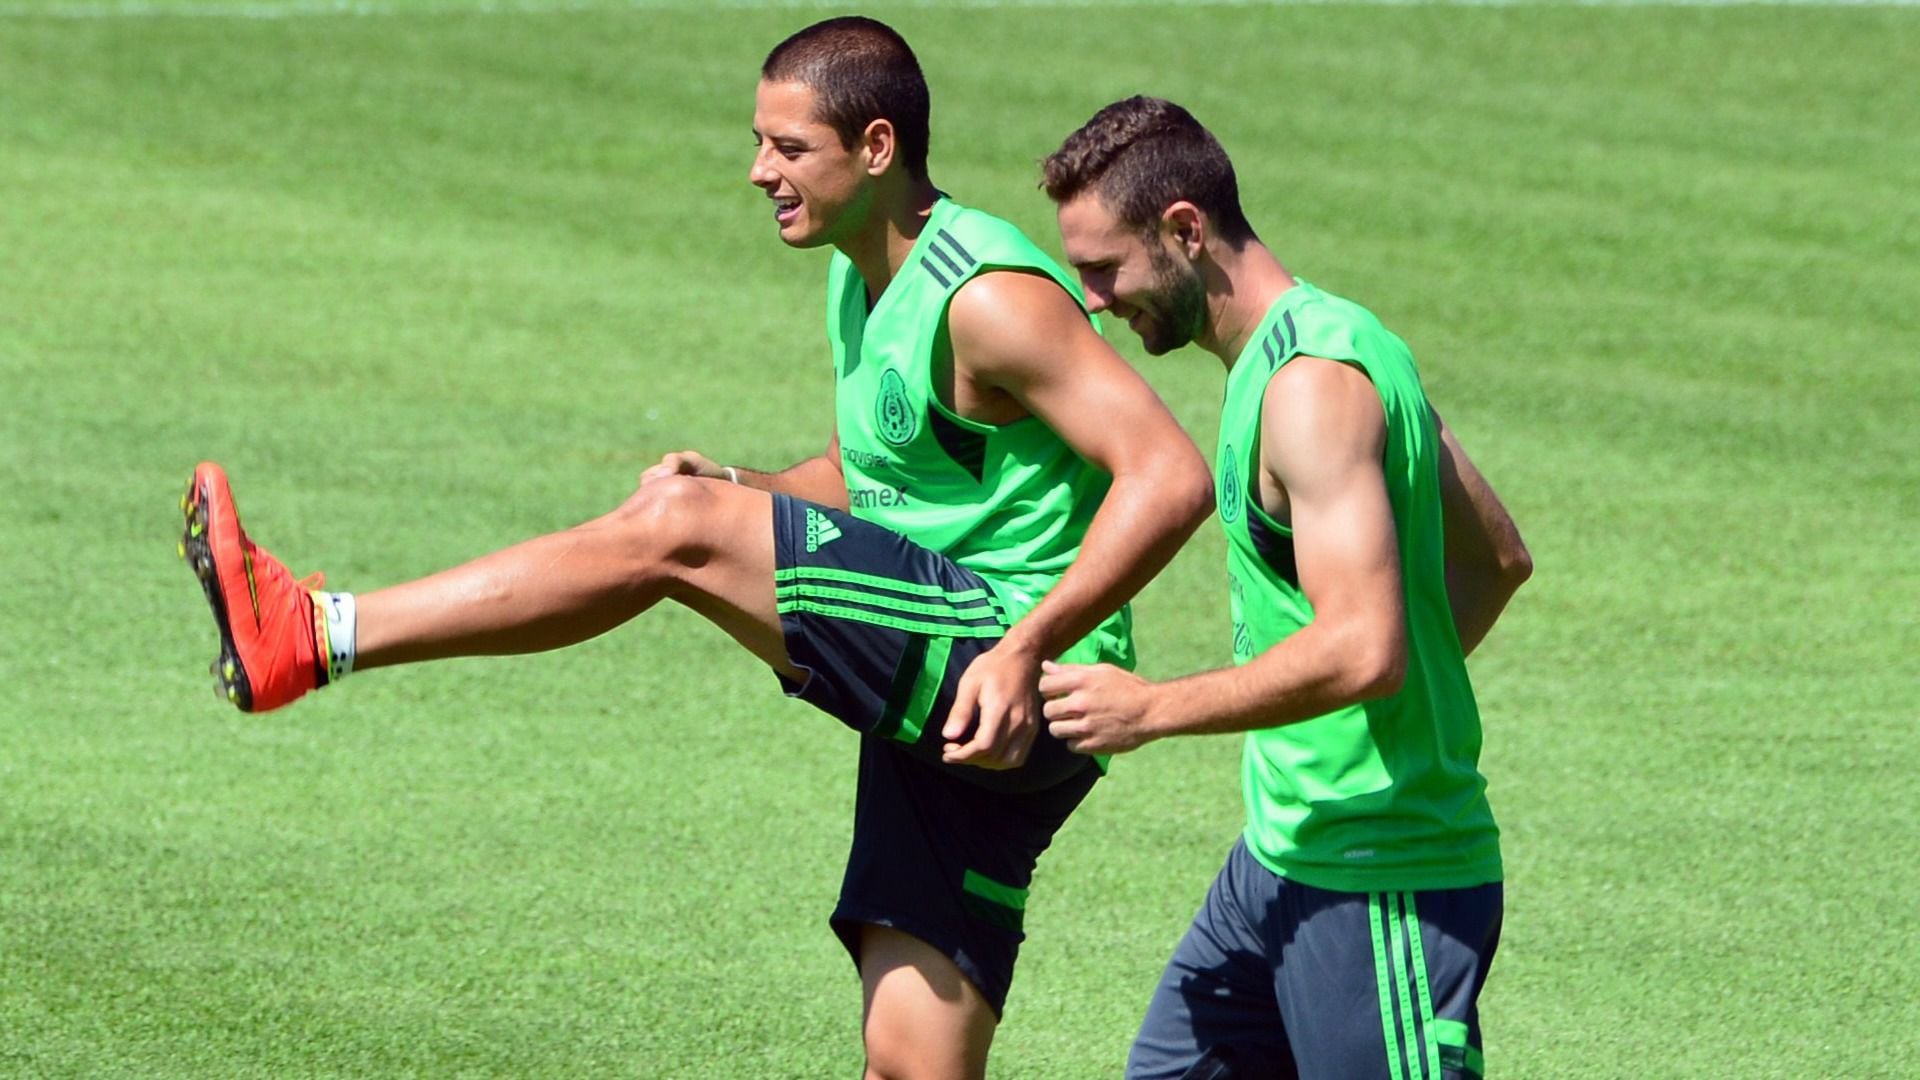 Mexico's forward Javier Hernandez (L) and defender Miguel Layun (R) stretch during a team training session at the Fortaleza University stadium in Fortaleza on June 28, 2014. Mexico will face Netherlands on June 29 for their Round of 16 match during their 2014 FIFA World Cup Brazil.   AFP PHOTO / Yuri CORTEZ